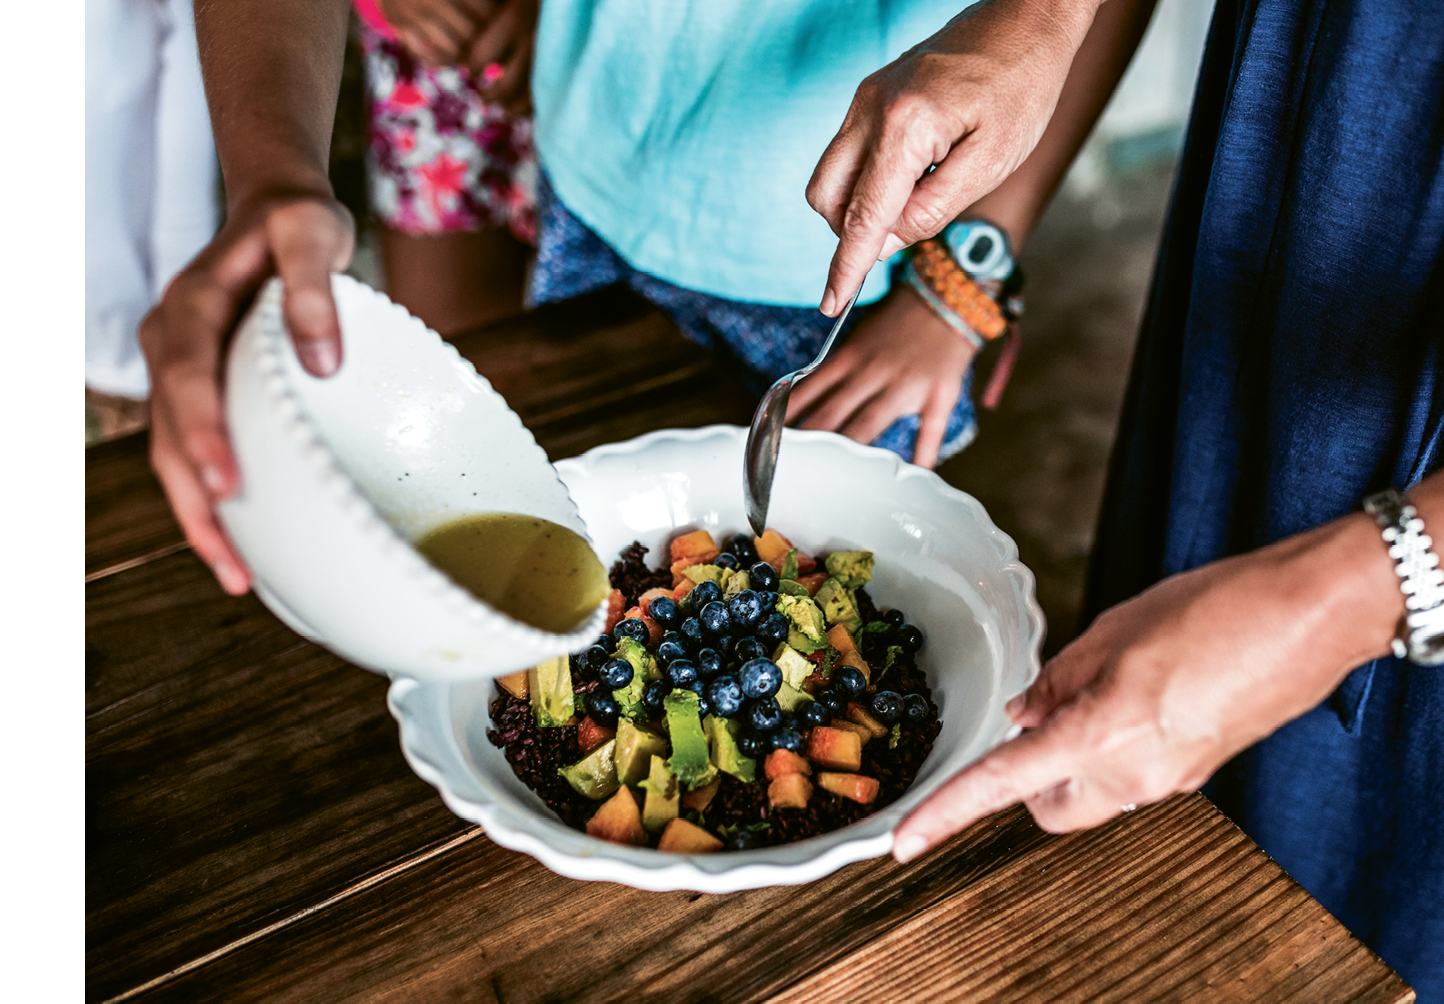 A salad of chilled black rice, mango, peaches, blueberries, avocado, and honey vinaigrette is a refreshing dish for the end of summer.